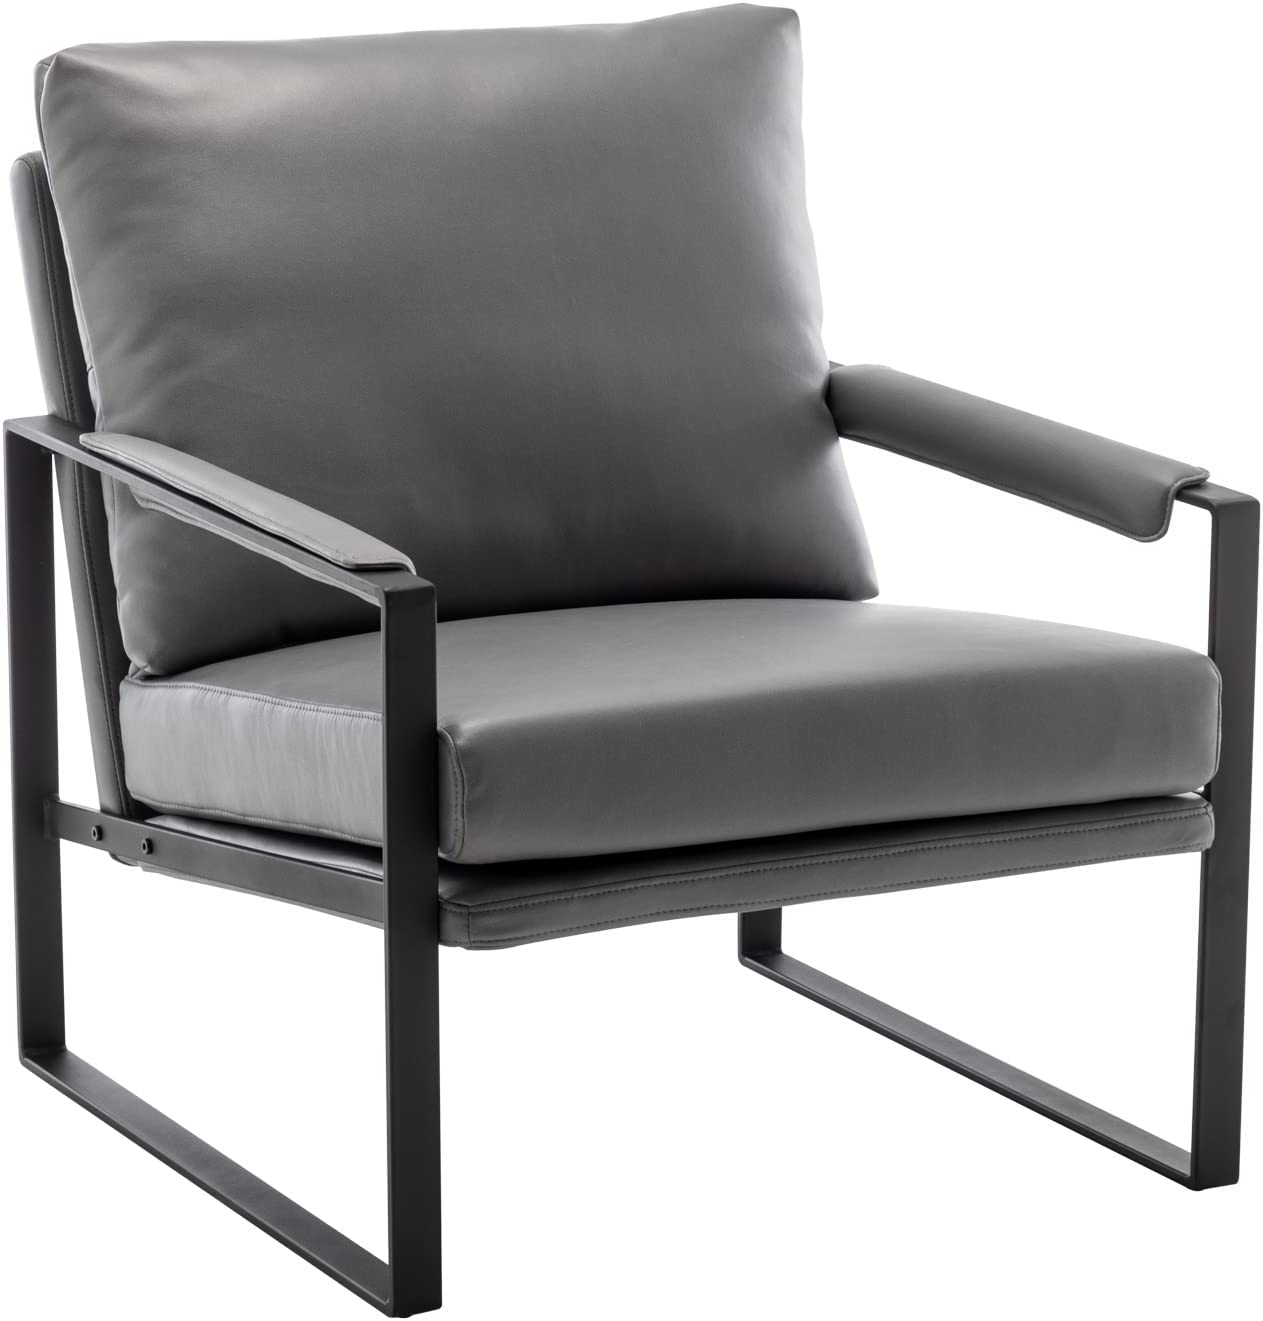 UNICOO - Modern Faux Leather Accent Chairs, Armchairs Living Room Chairs Leisure Chair Reception Chair with Metal Frame (ZKL-239K)